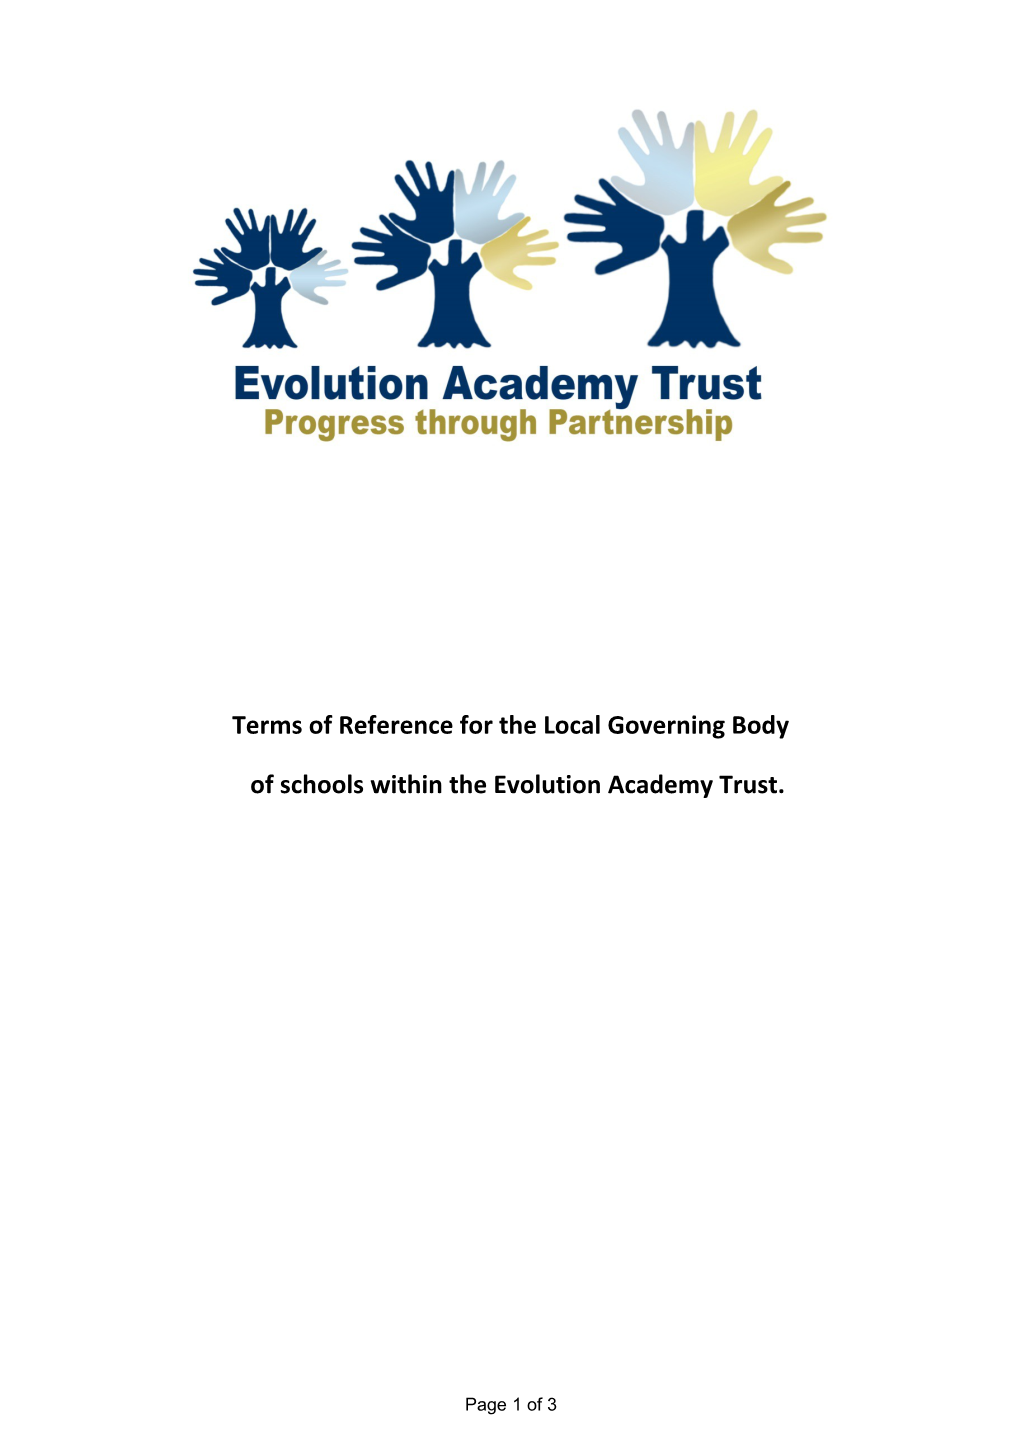 Terms of Reference for the Local Governing Body